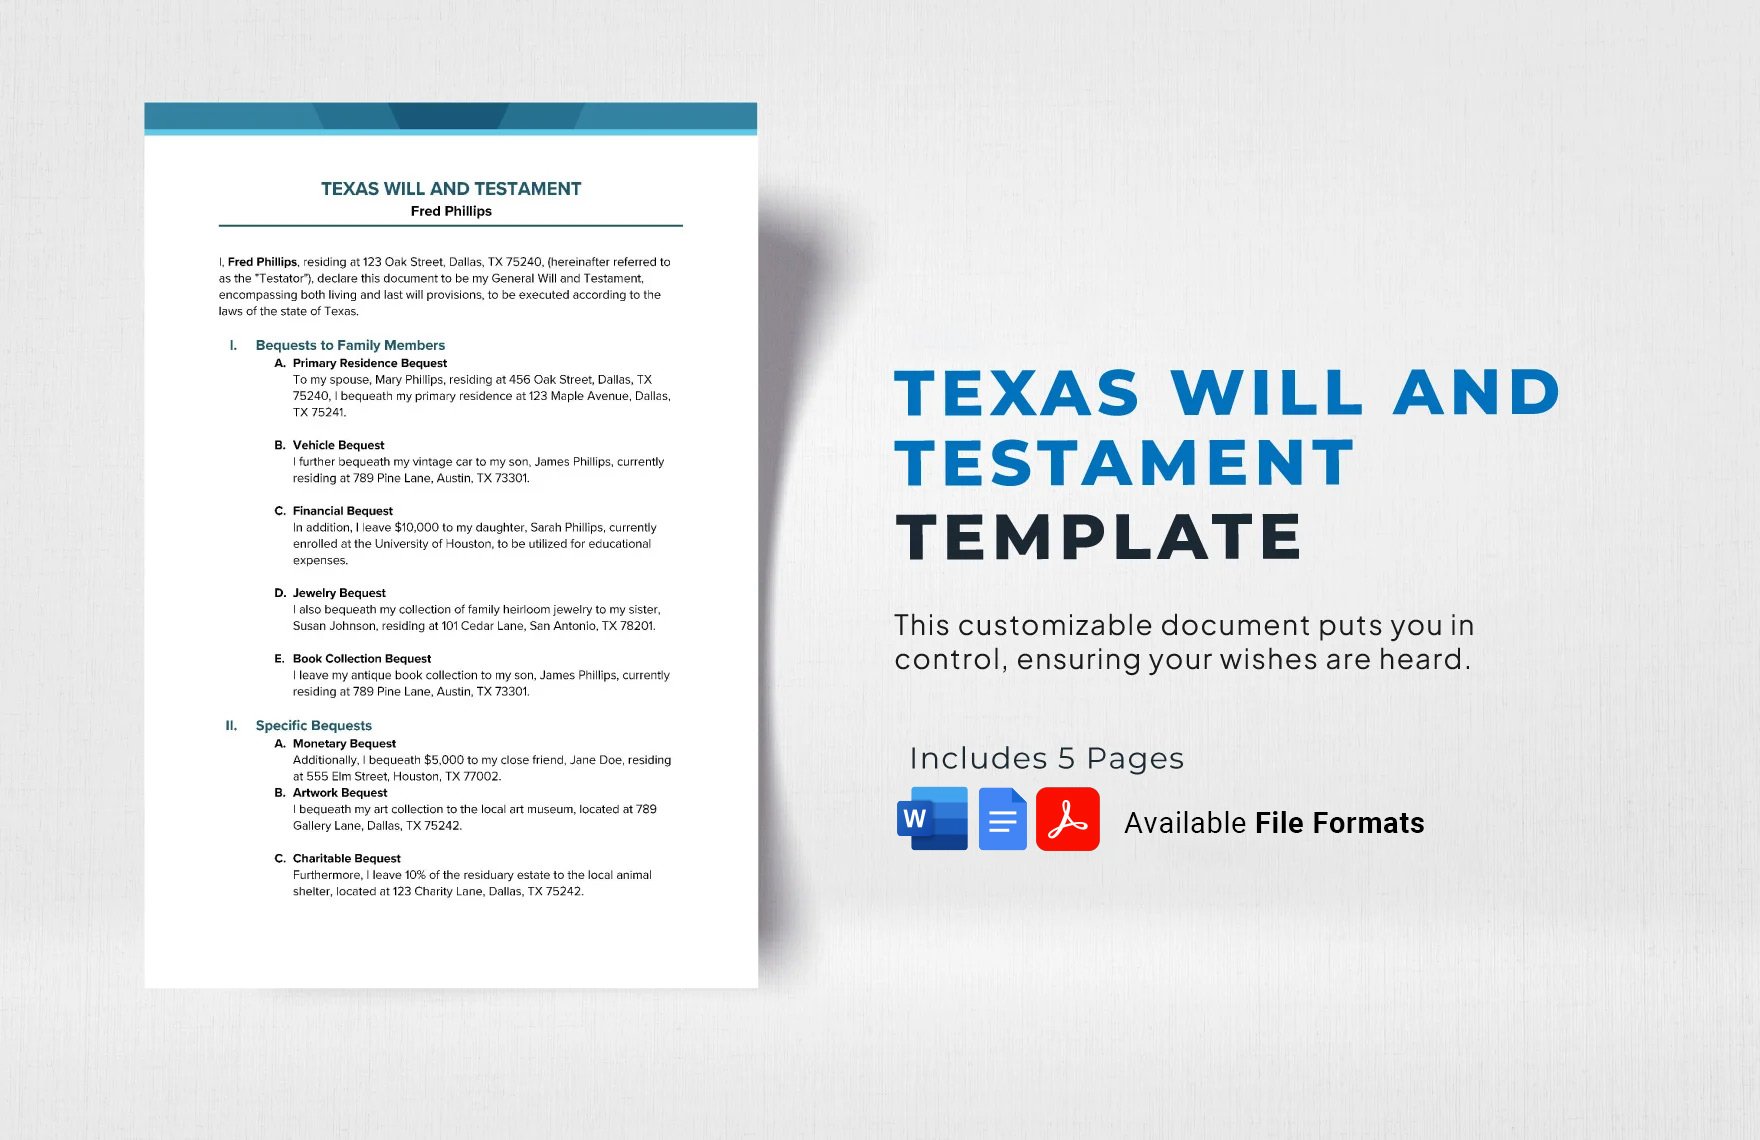 Texas Will and Testament Template